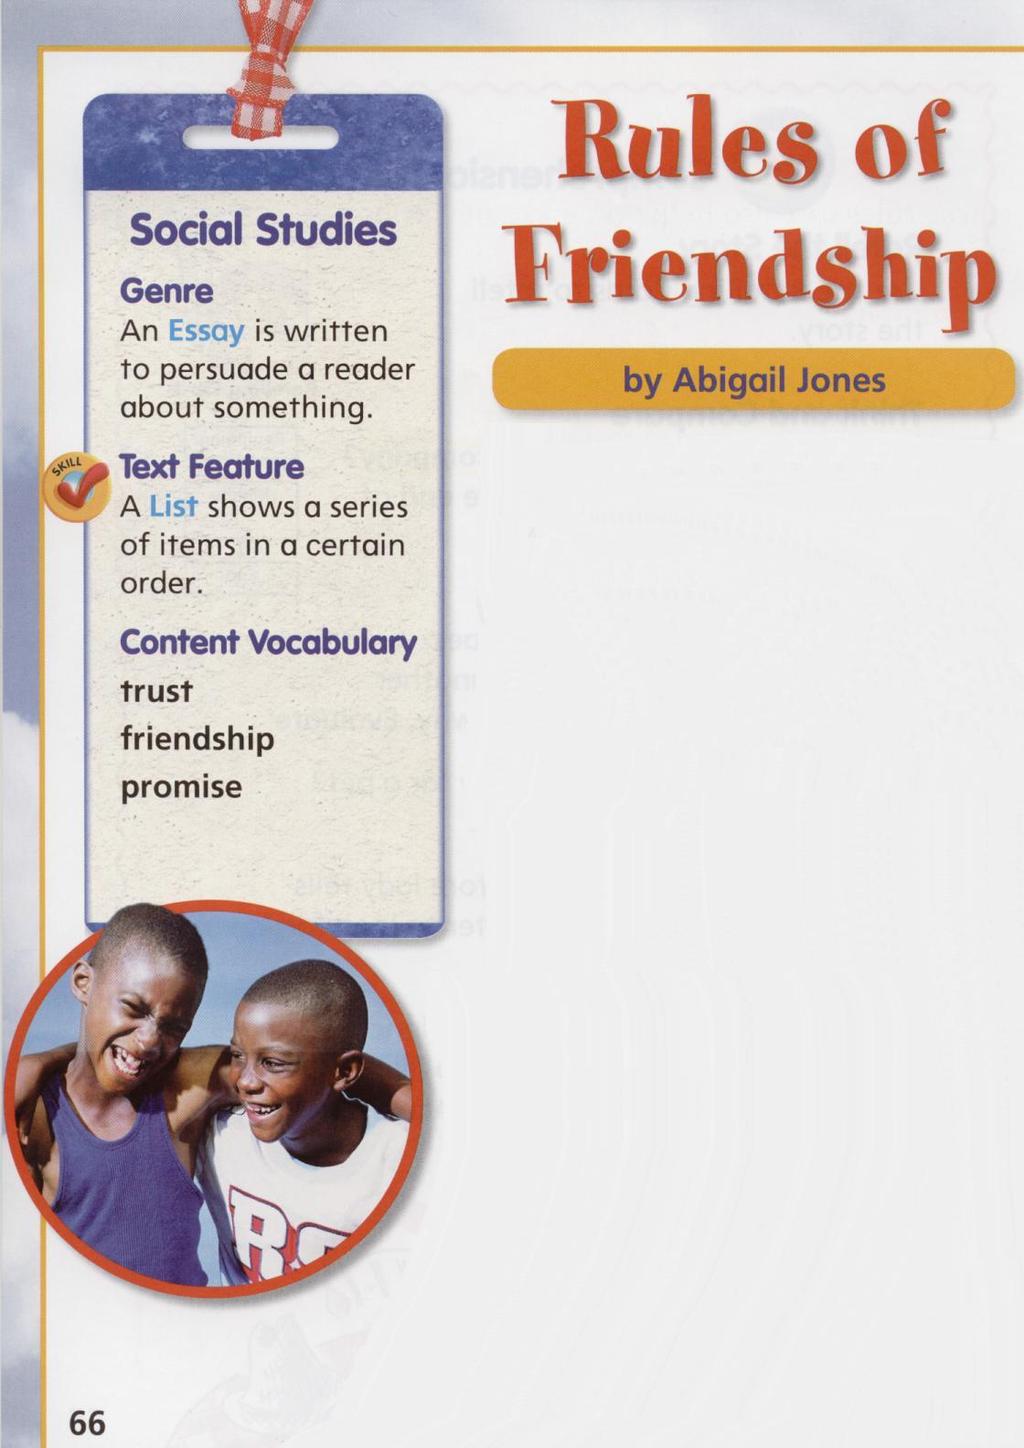 When you follow this list of rules you may keep friendships for a long time. Following these rules can also help you make new friends.